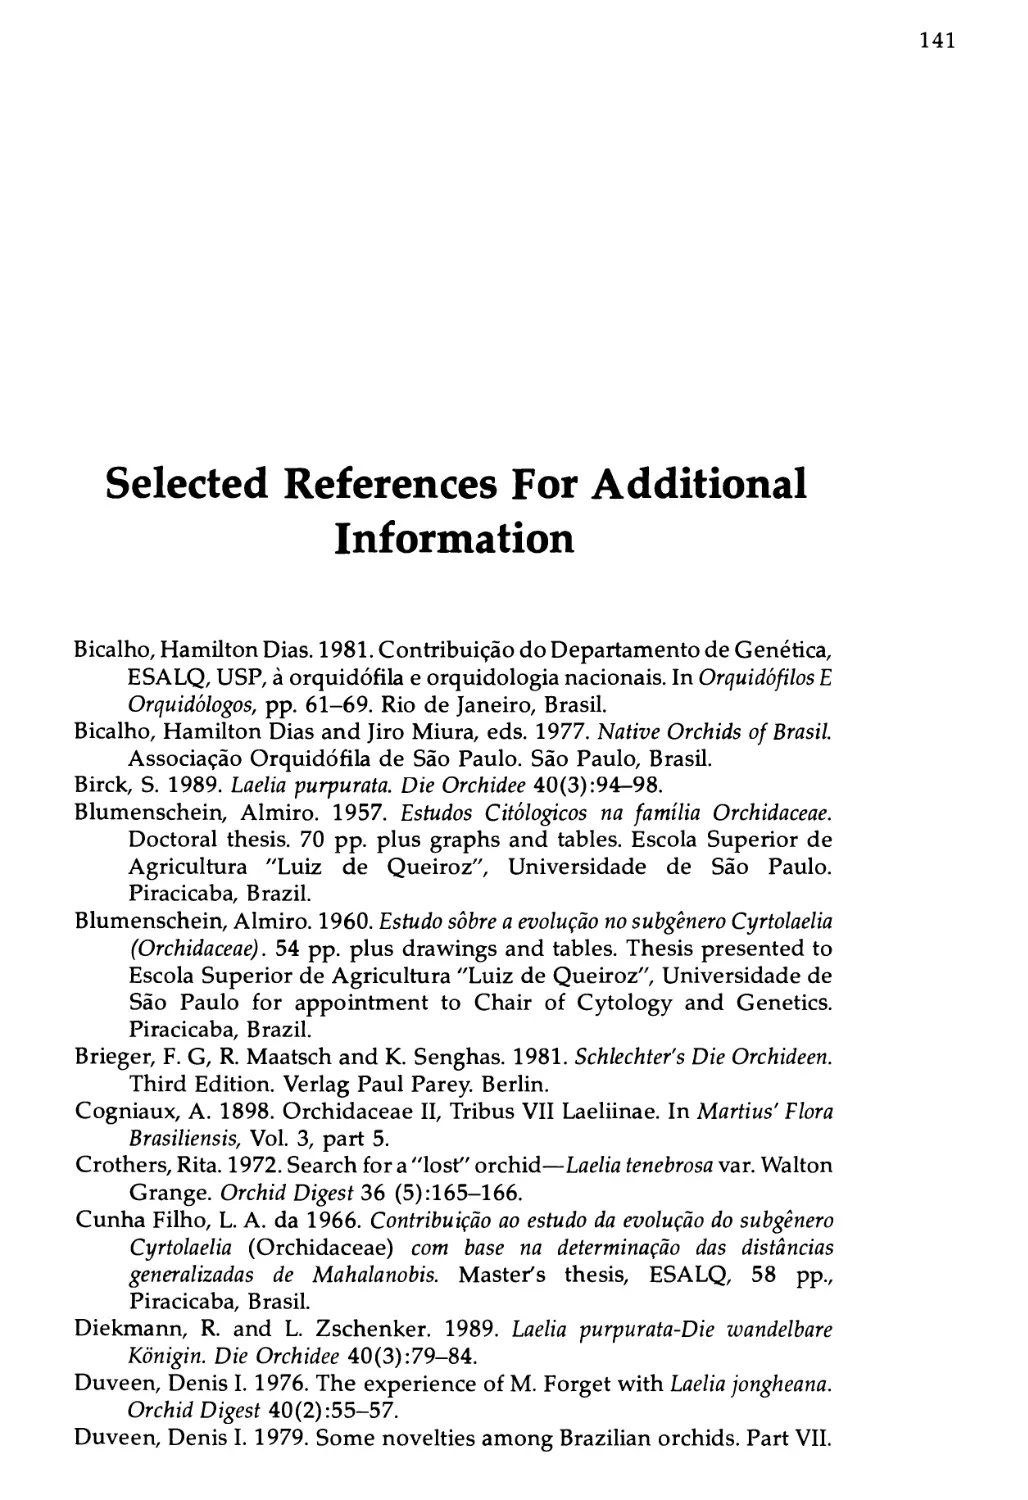 Selected References for Additional Information